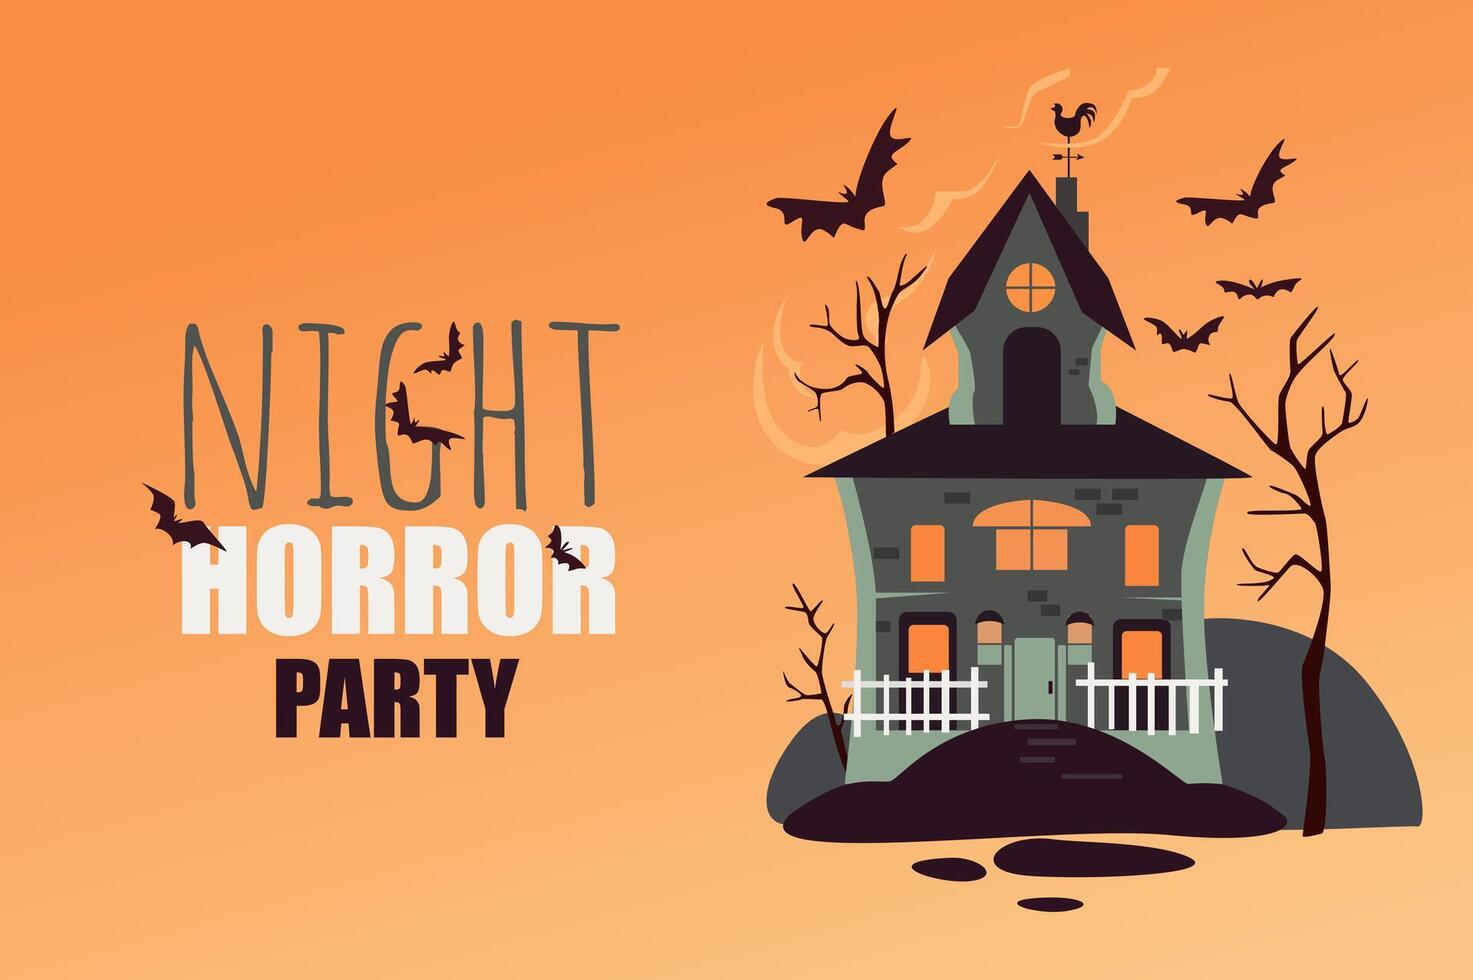 Halloween party poster template in flat design. Banner invitation layout to night horror festival with creepy old house or spooky castle, horror black trees and flying bats. Vector illustration.